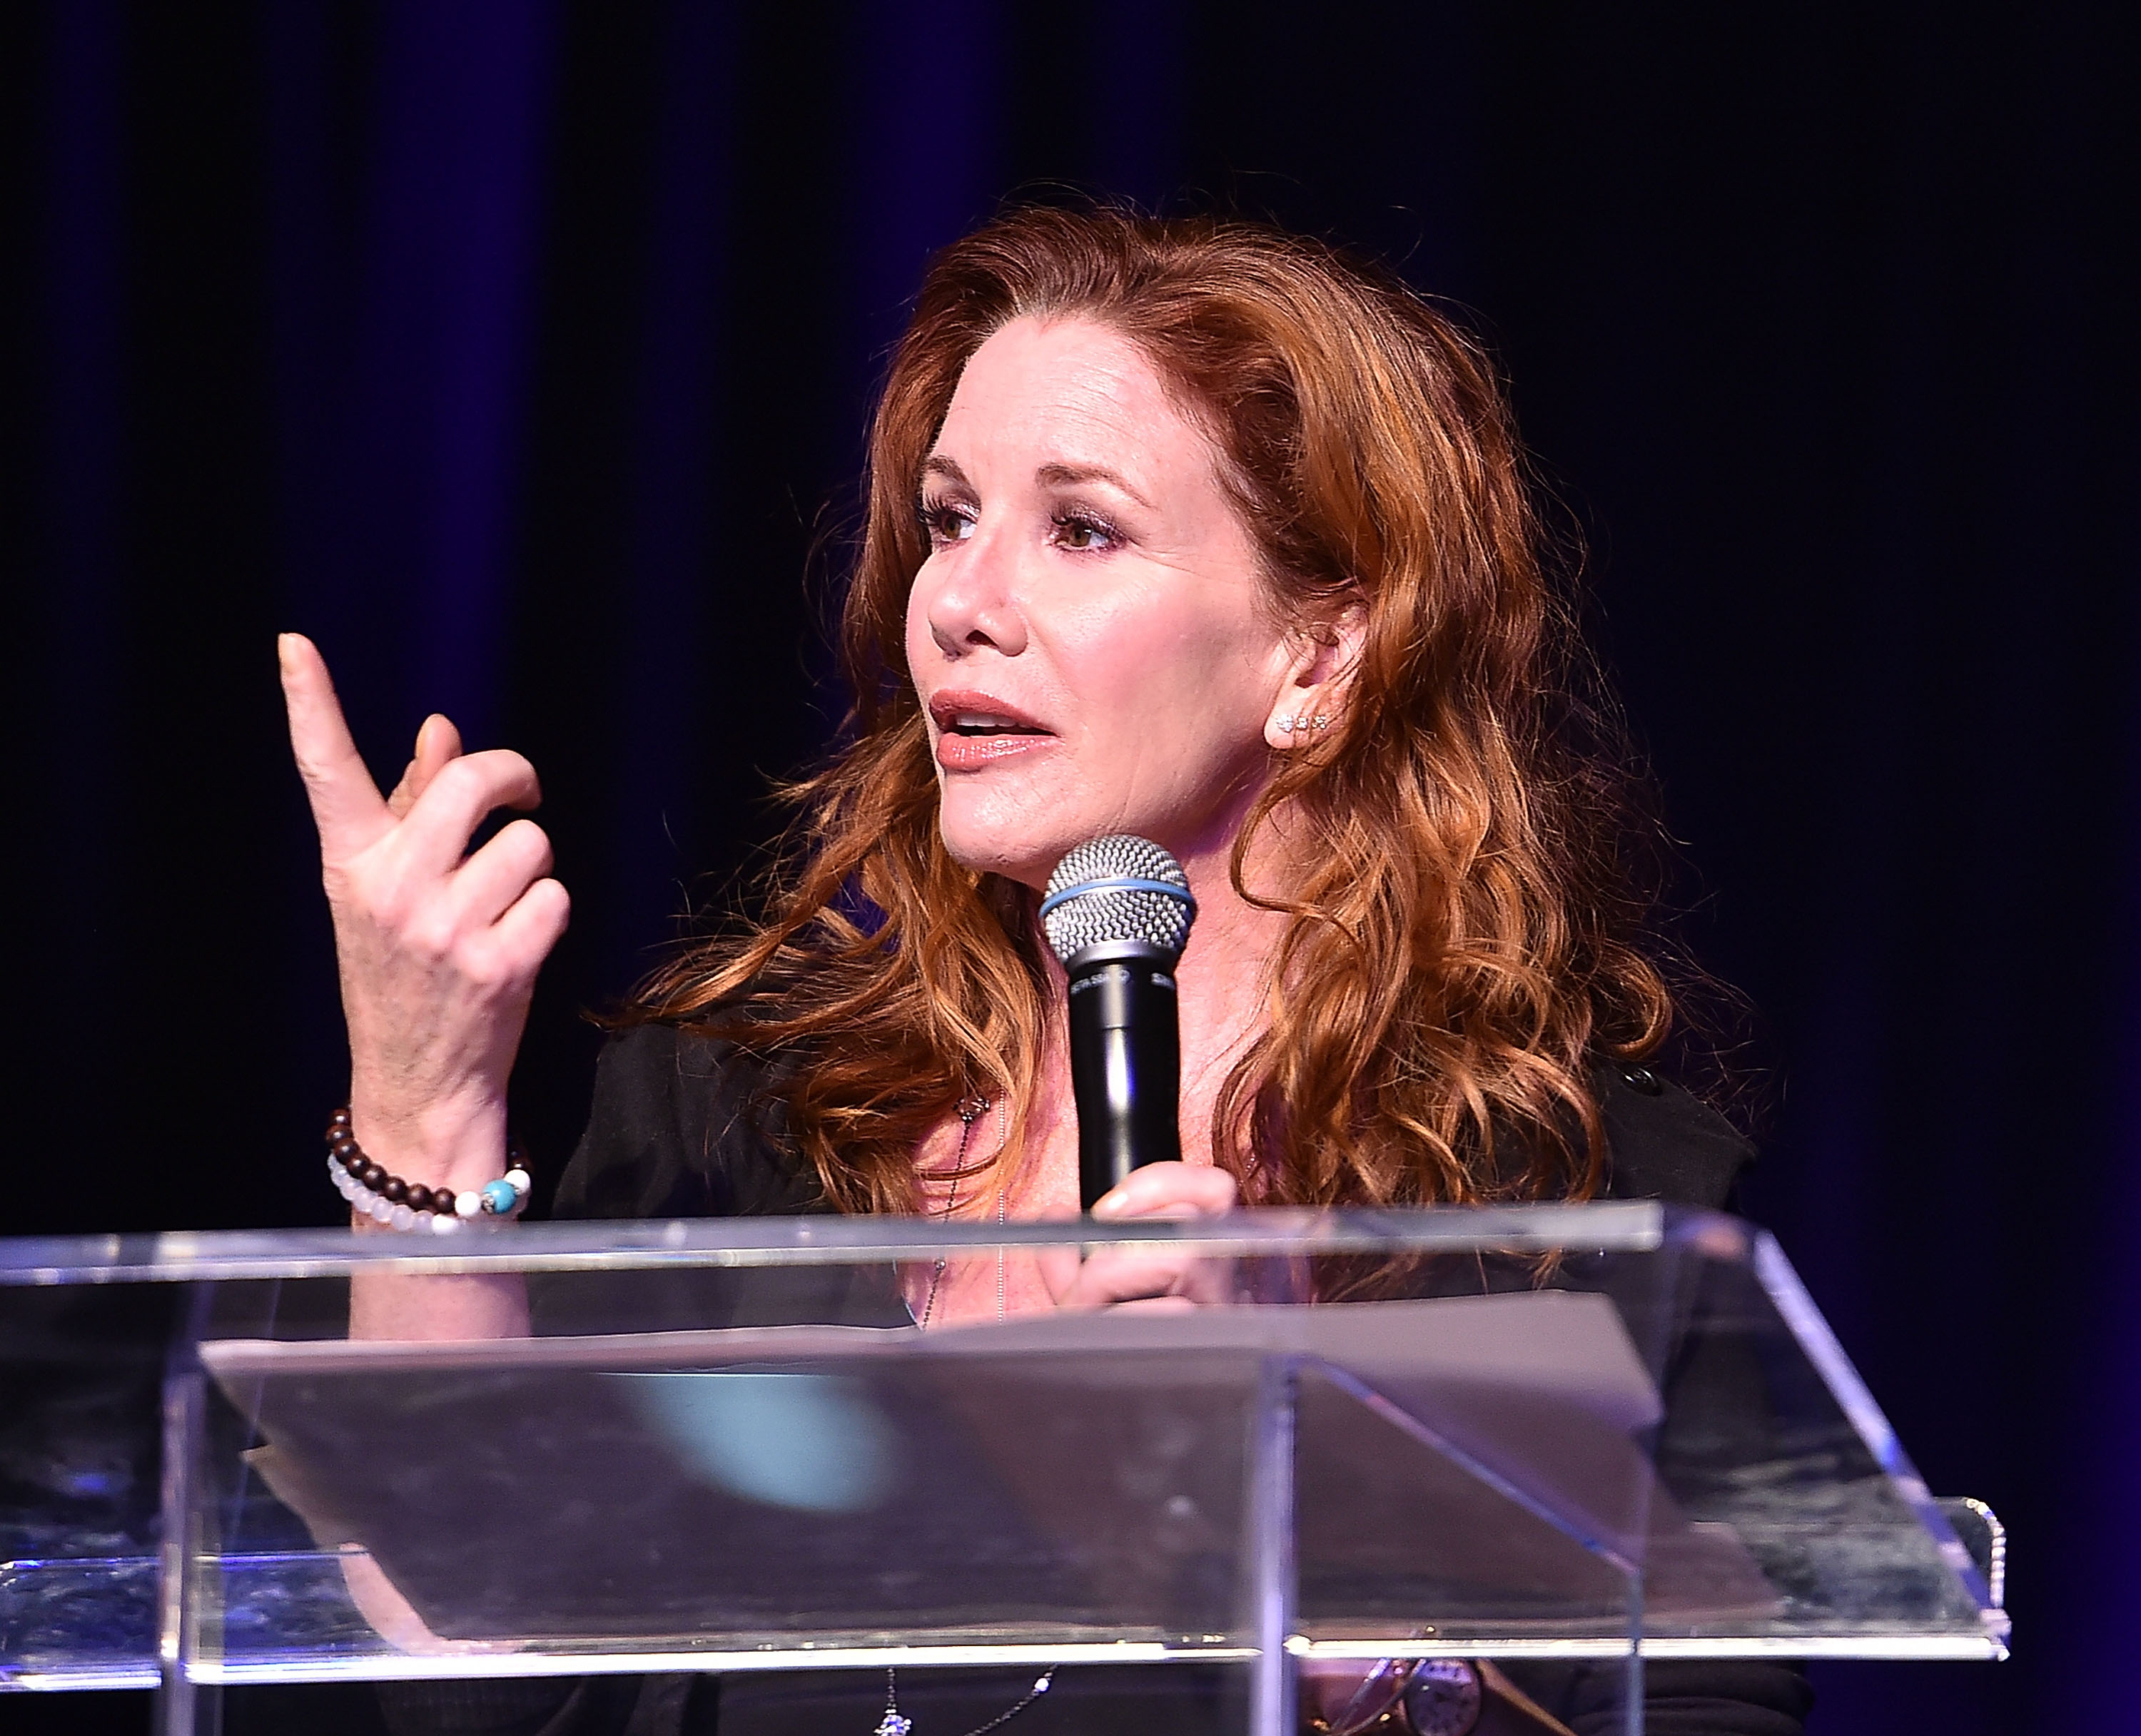 Actress Melissa Gilbert onstage at the Atlanta Ultimate Women's Expo at Georgia World Congress Center on May 3, 2015  in Atlanta, Georgia. (Paras Griffin&mdash;Getty Images)